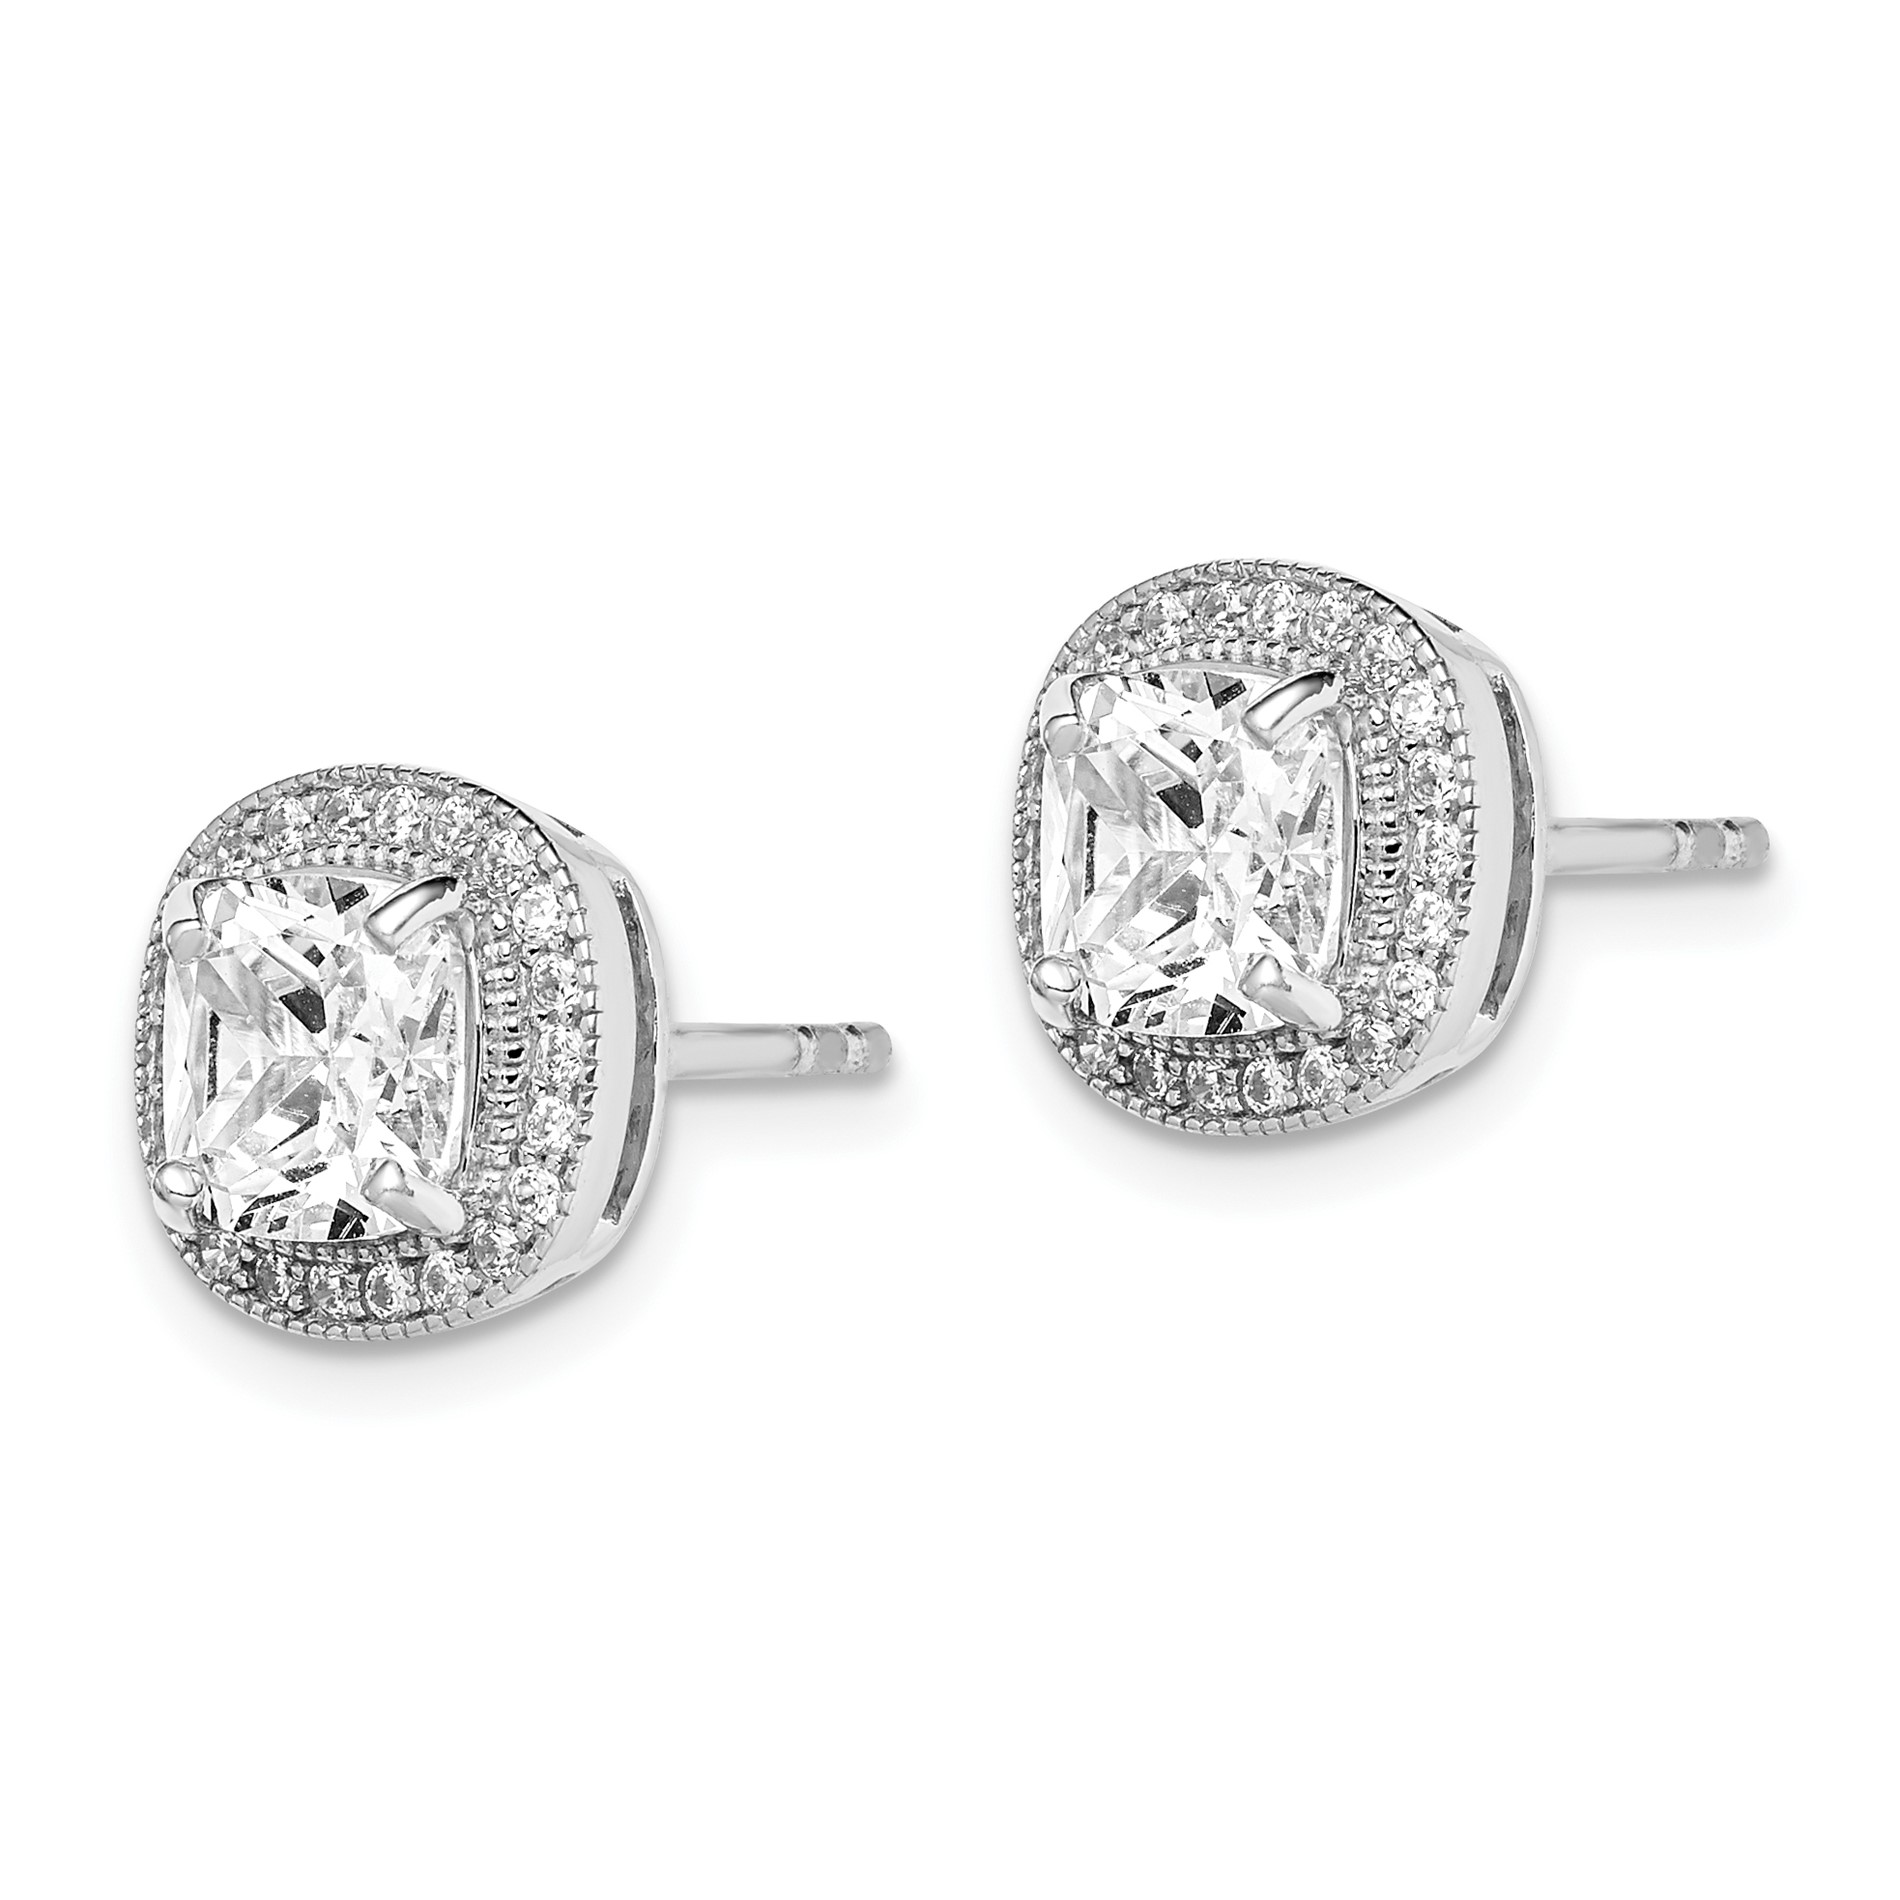 Diamond2Deal 925 Sterling Silver Rhodium-plated Polished and Textured 6mm Cubic Zirconia Halo Stud Earrings